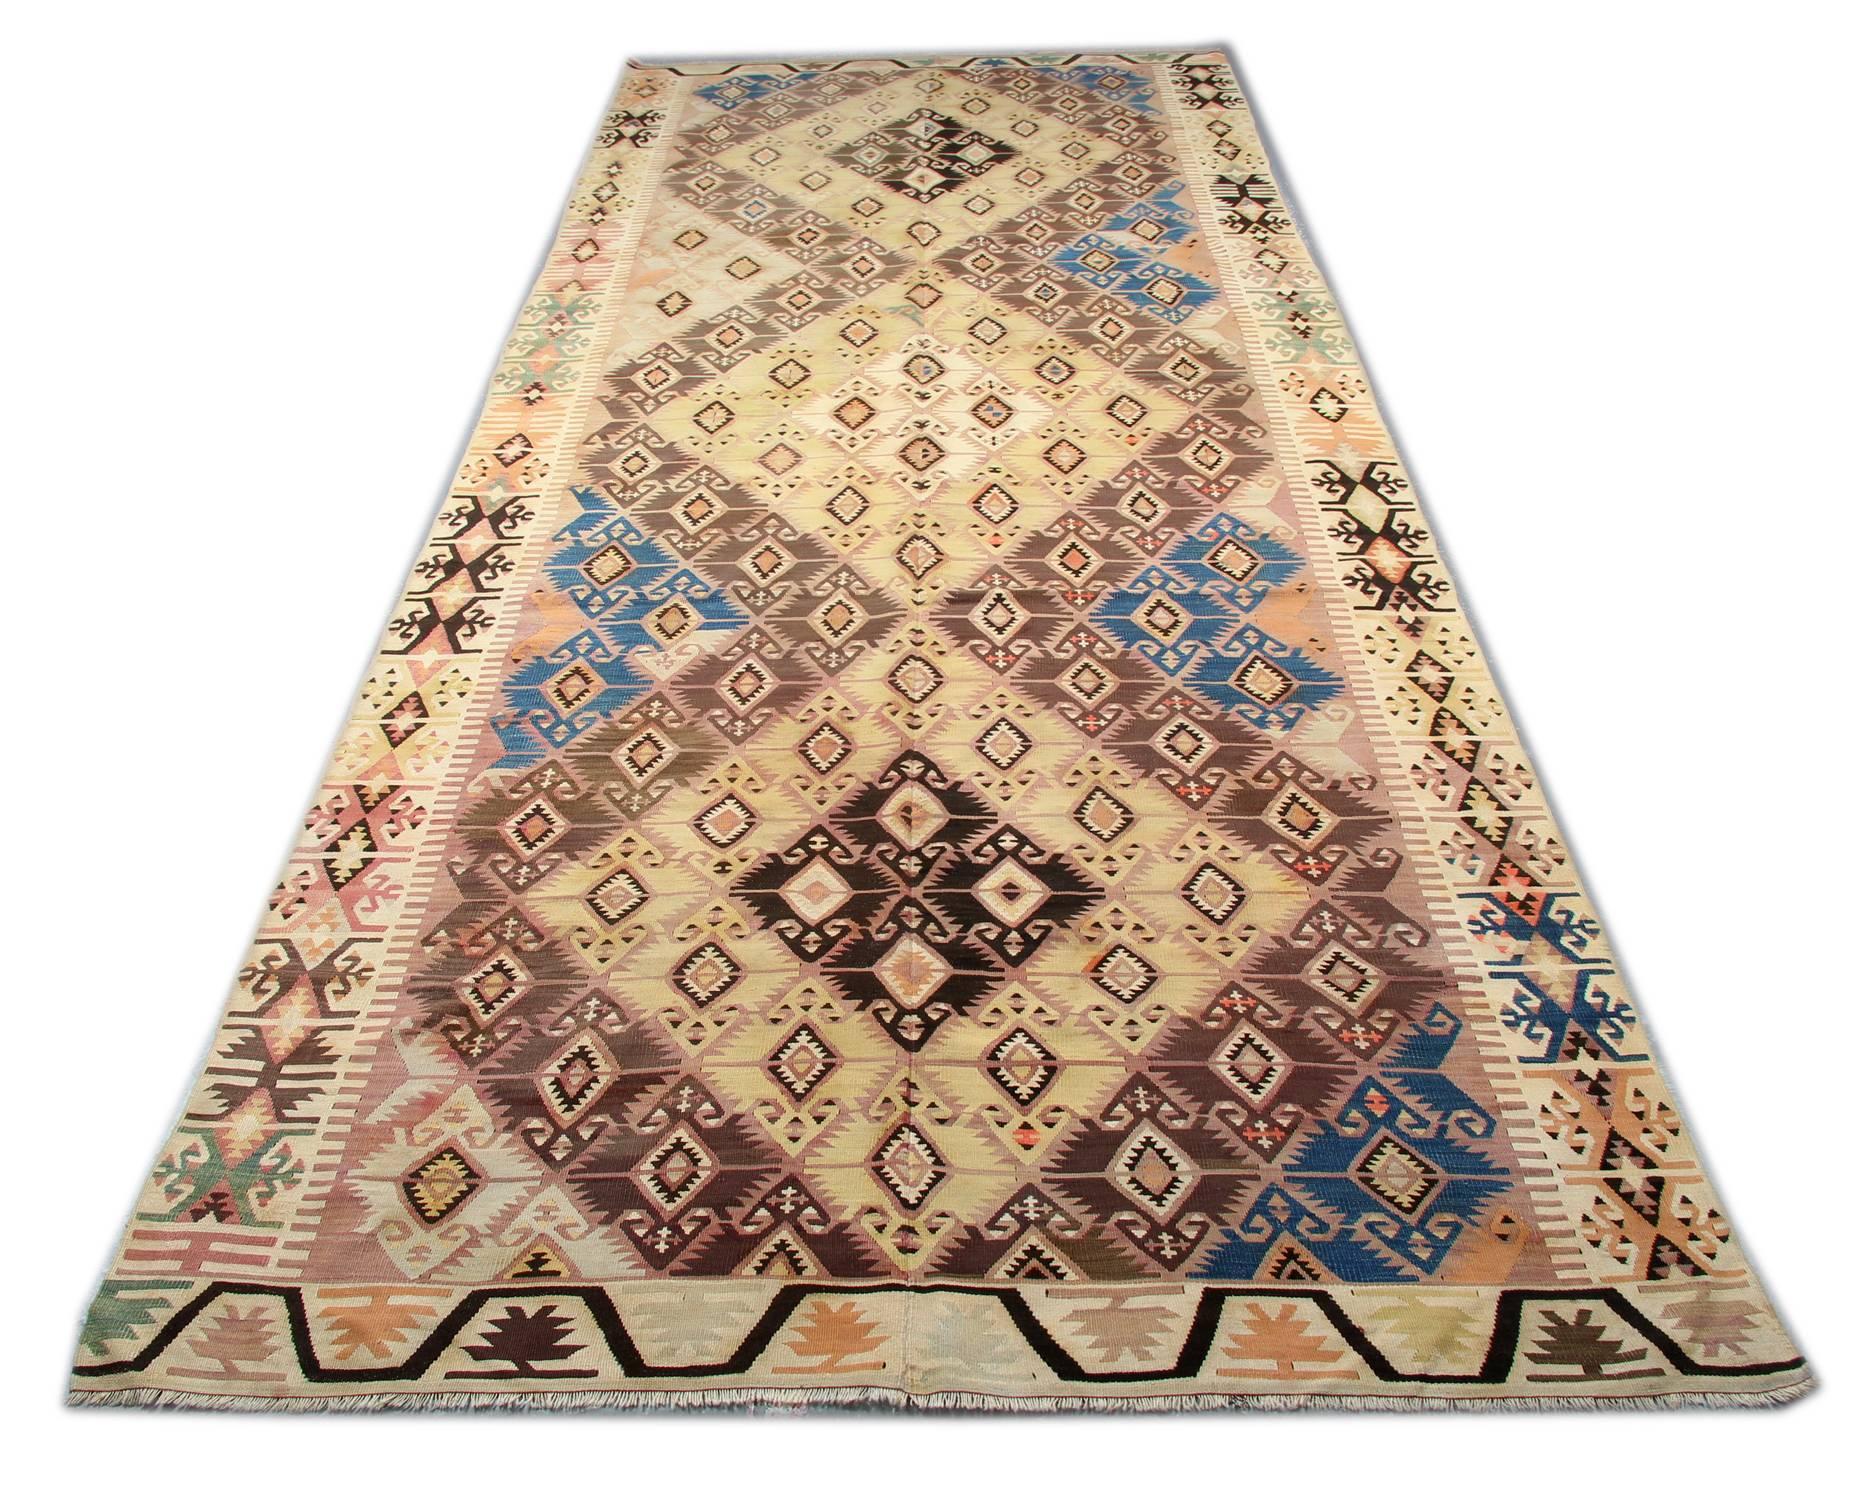 This handmade carpet colourful Rug is a Turkish carpet rug has woven by very skilled weavers in Turkey, who used the highest quality wool and cotton. The flat-weave rug has a light orange, orange, green, white, cream, gold, blue, yellow and dark